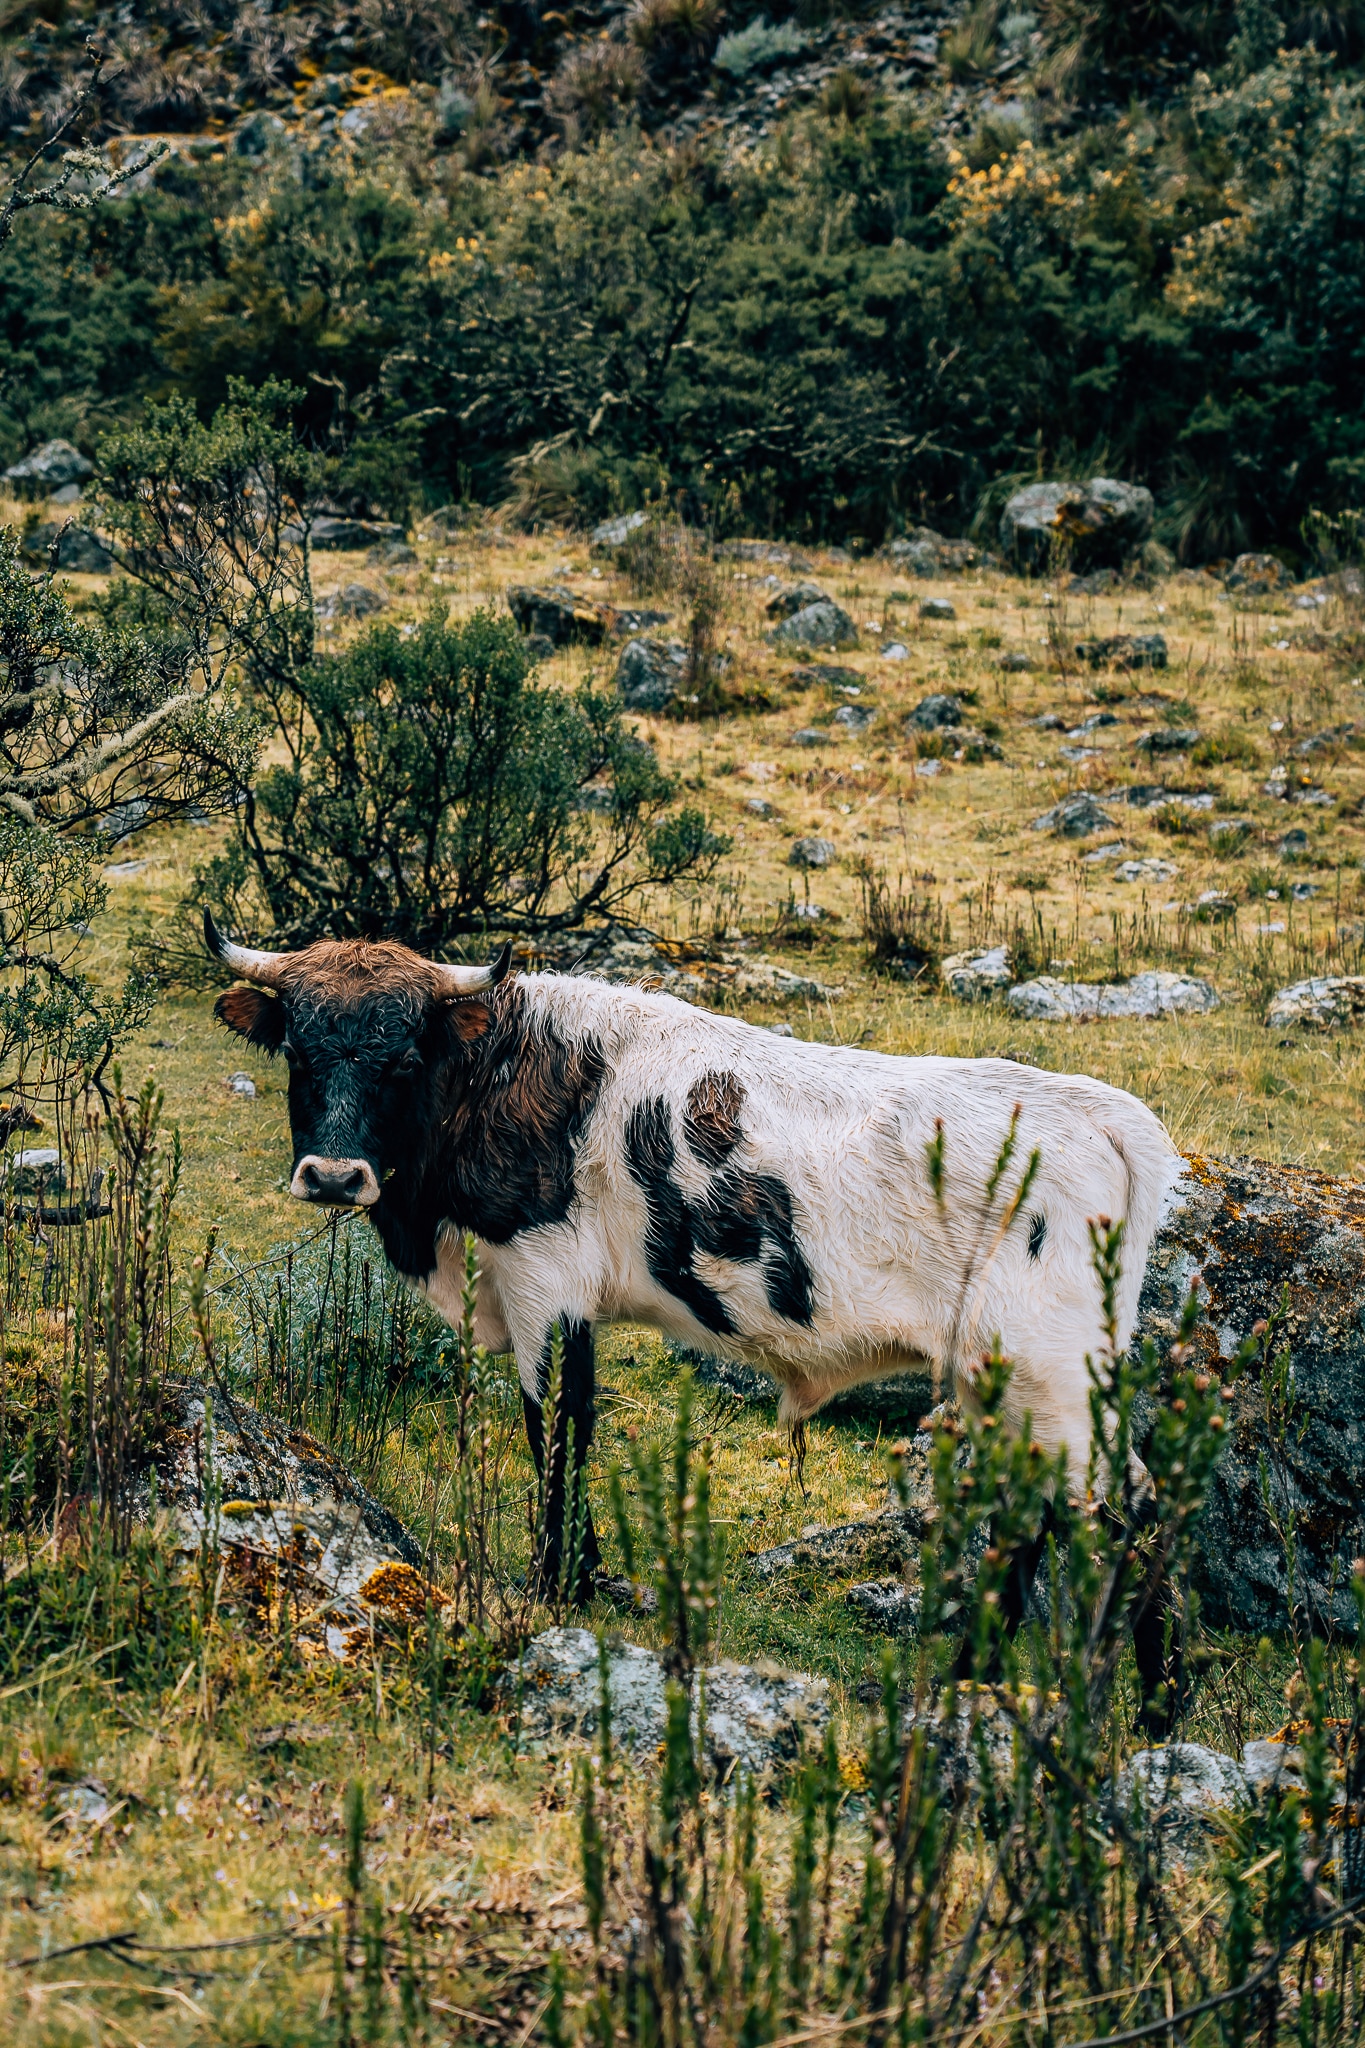 Cow with horn standing in the grass